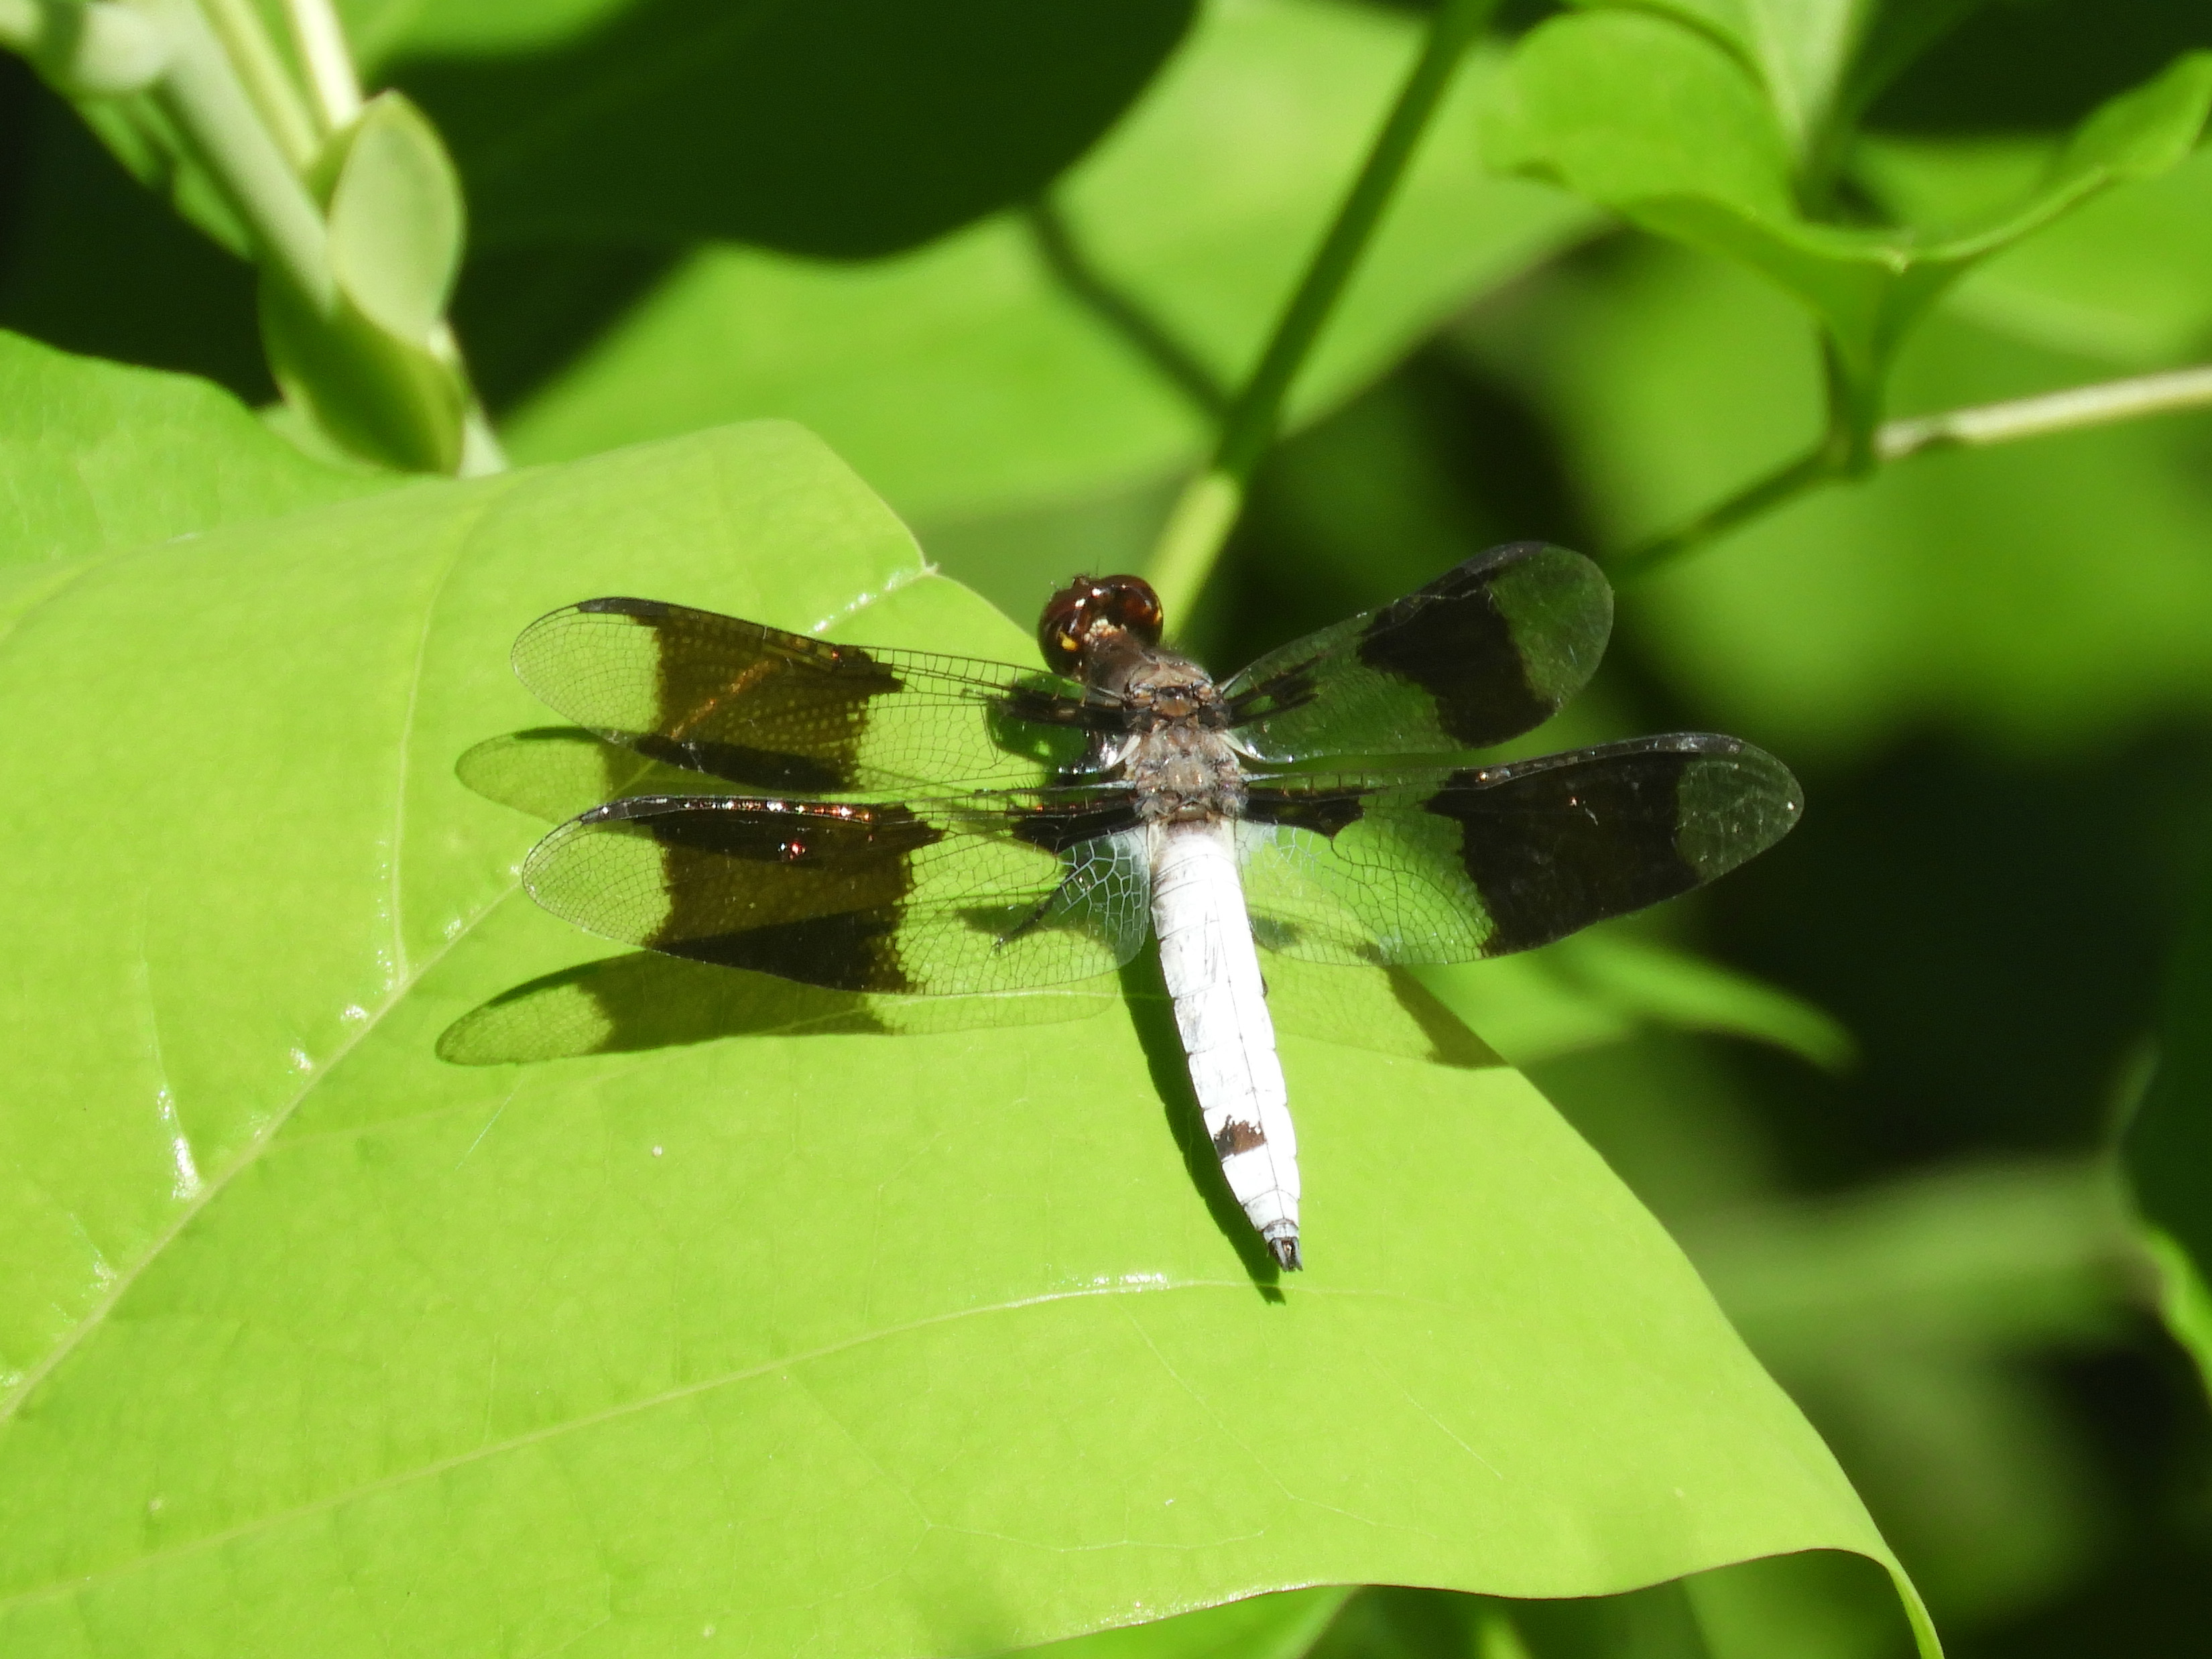 BW common whitetail dragonfly